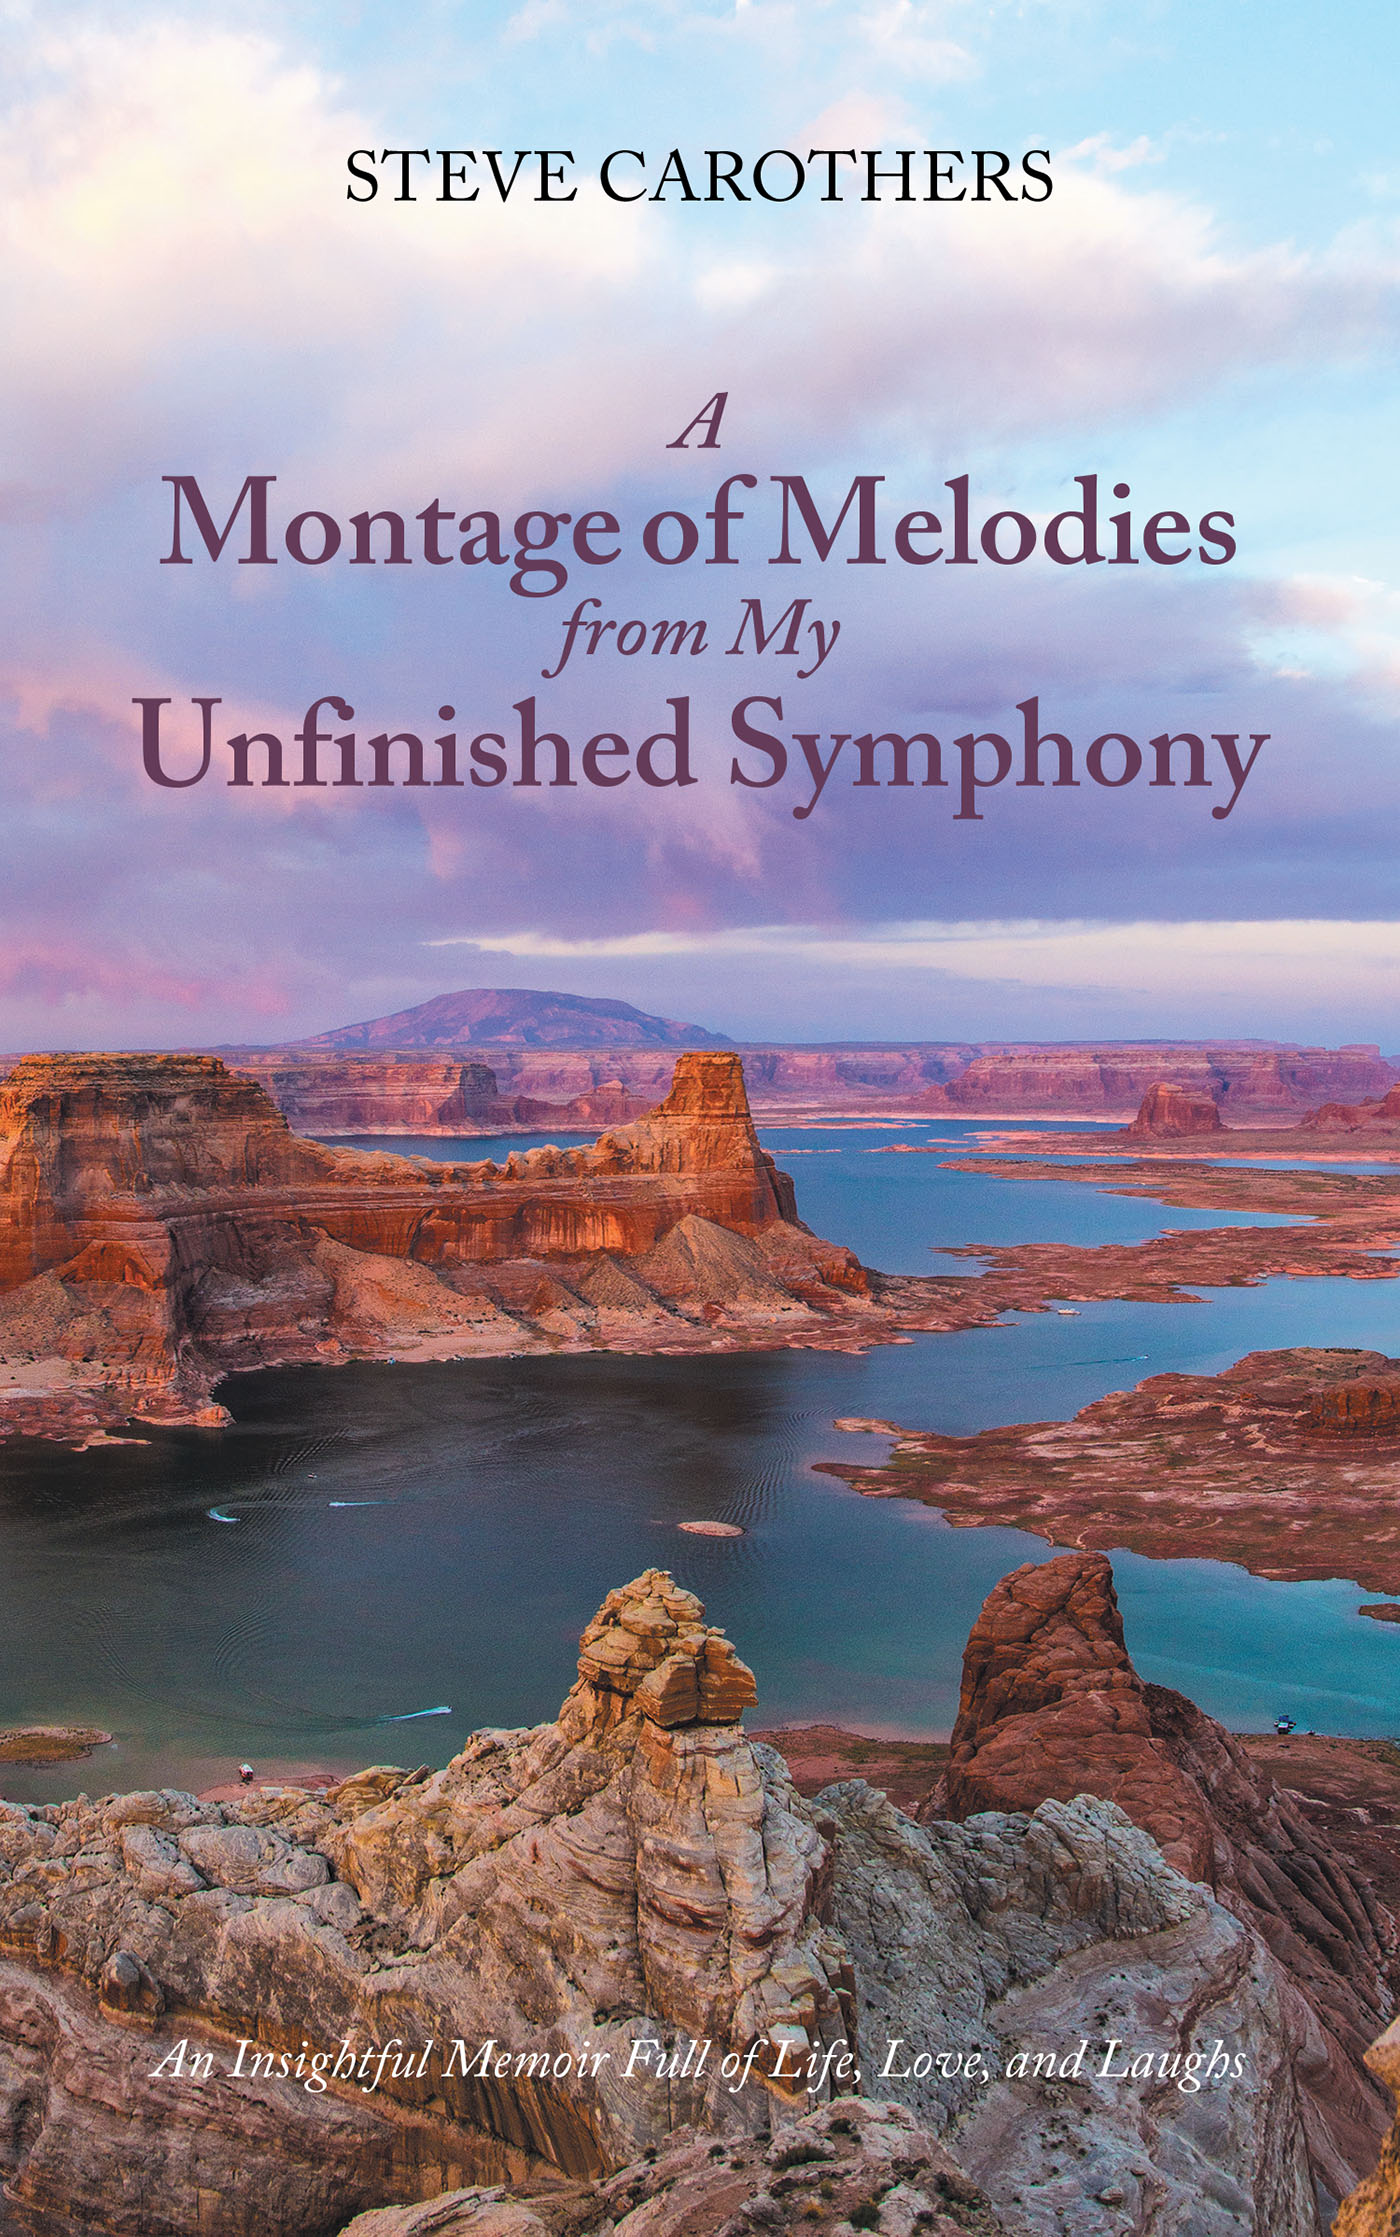 Author Steve Carothers’s New Book, “A Montage of Melodies from My Unfinished Symphony: An Insightful Memoir Full of Life, Love, and Laughs,” Shares a Lifetime of Memories